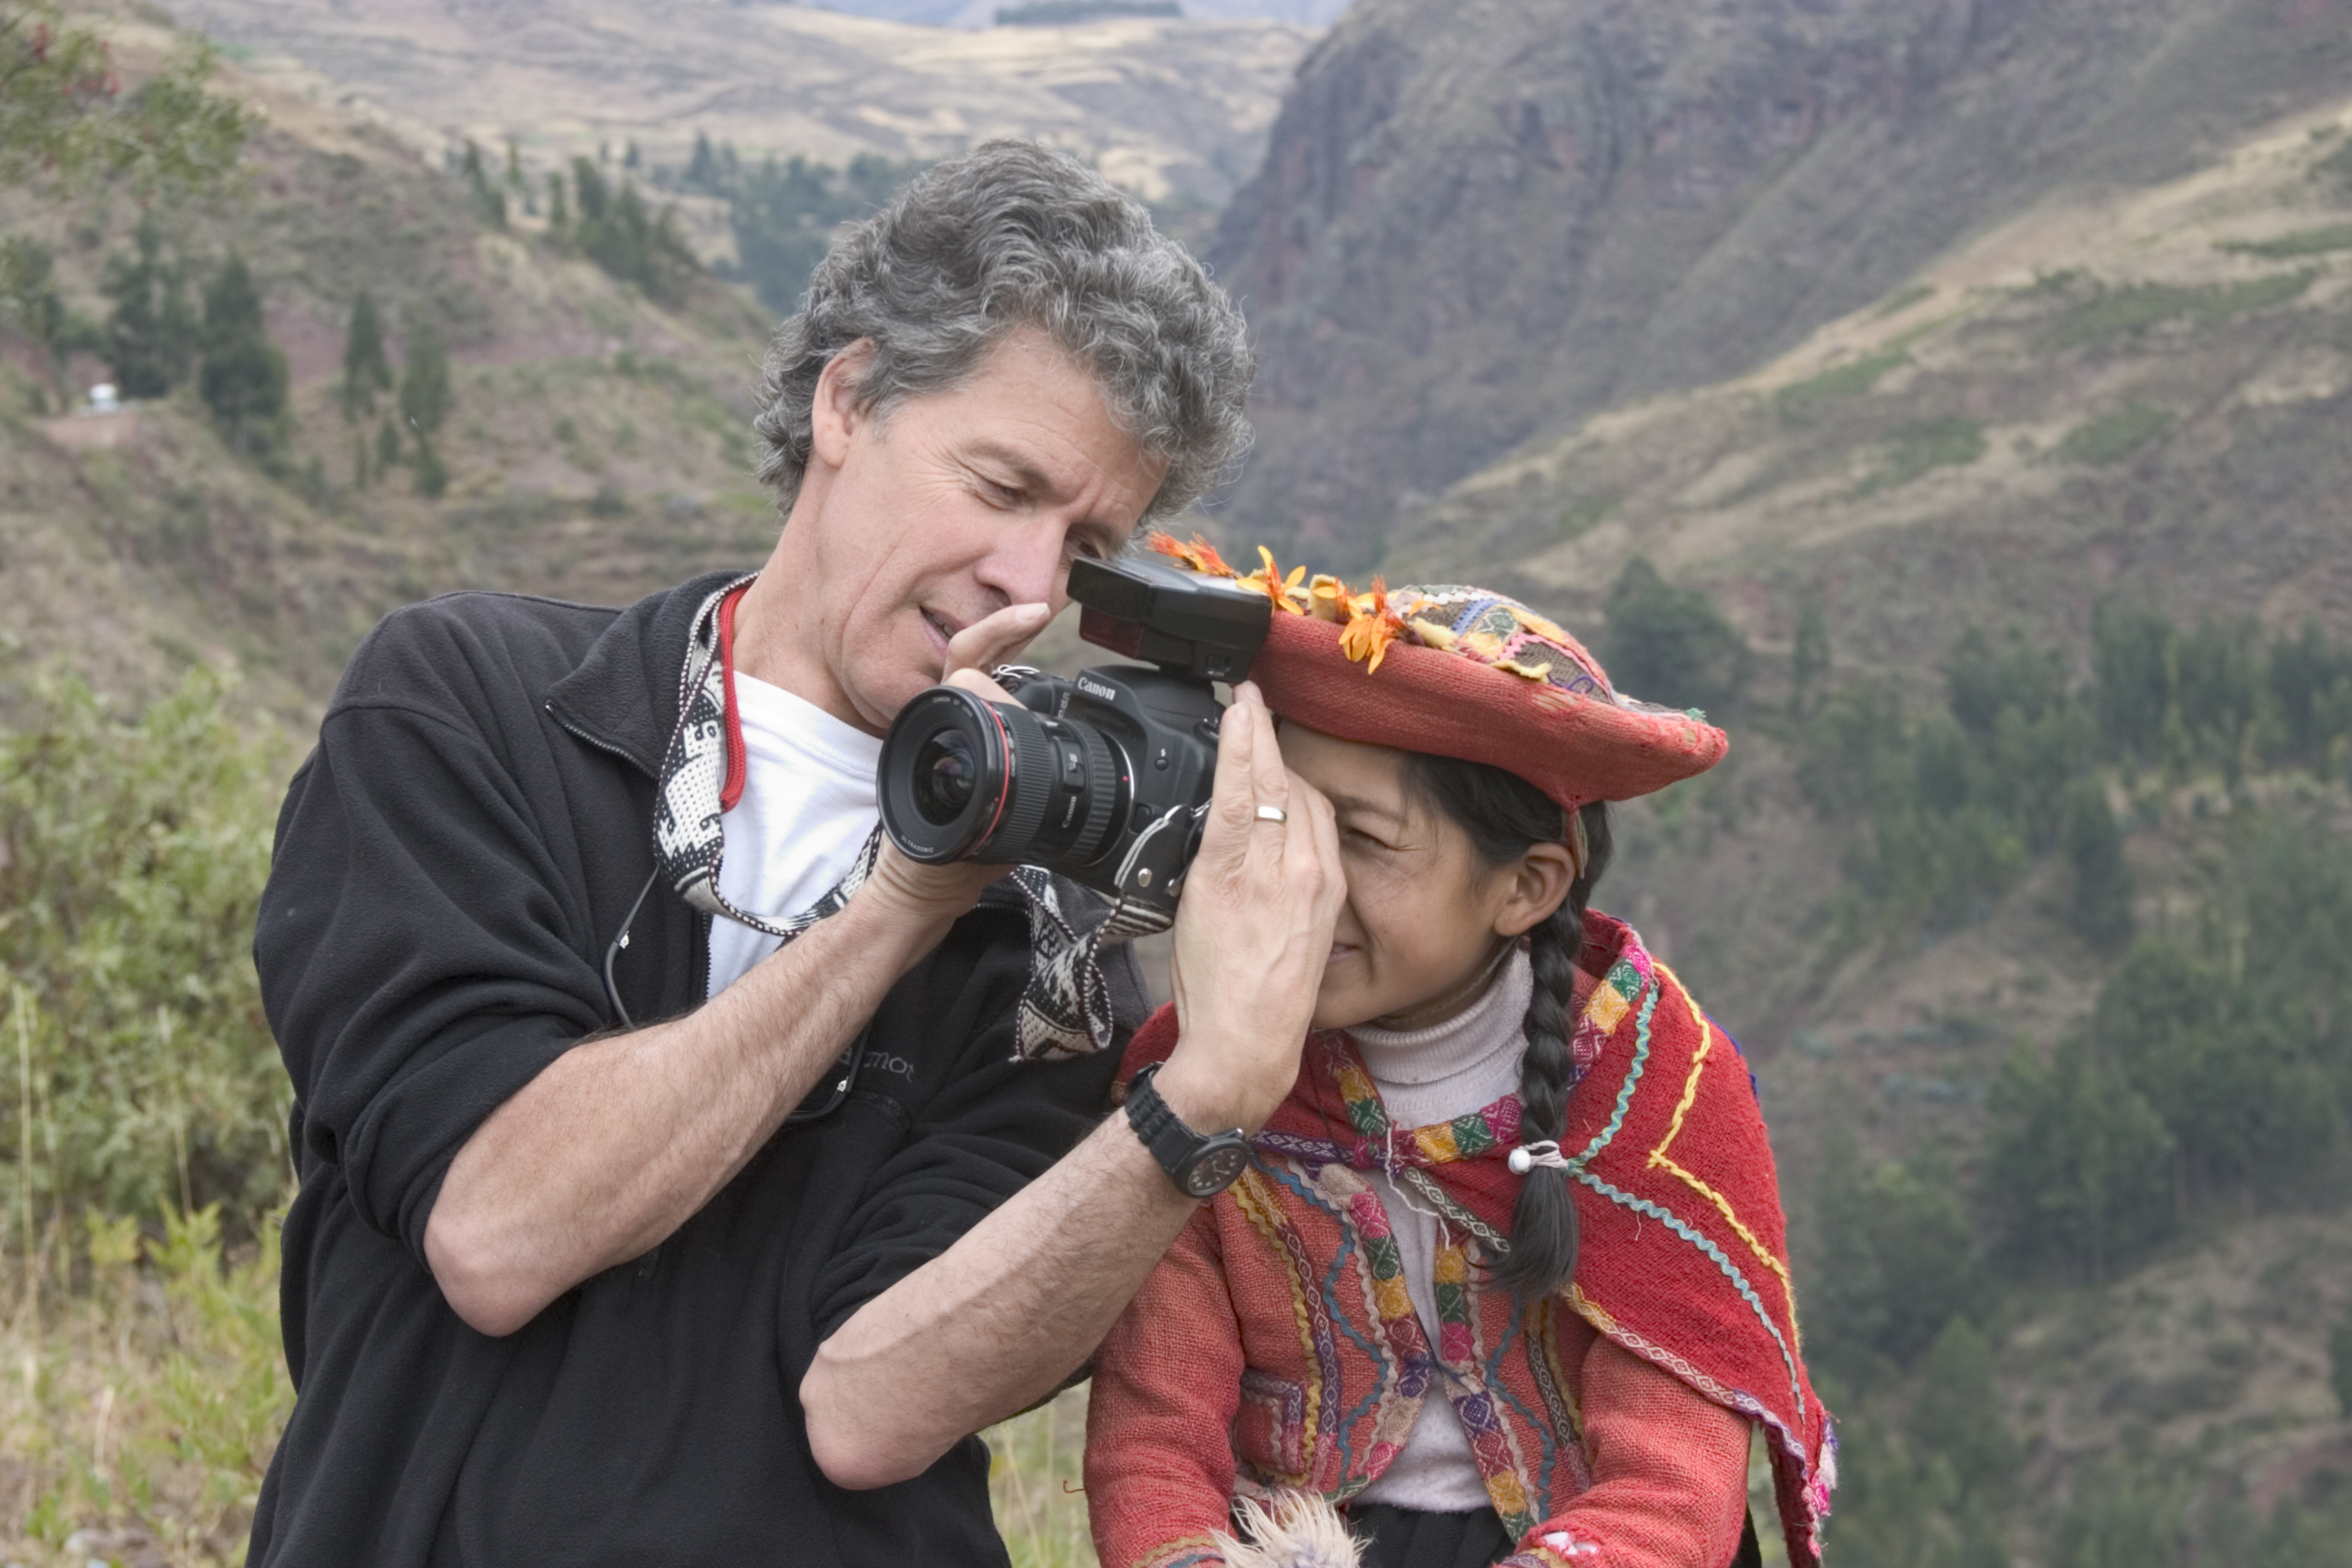 FRIENDSHIP THROUGH A DIFFERENT LENS: Bridges founder and internationally acclaimed photographer Phil Borges working with a Peruvian youth during an international workshop.